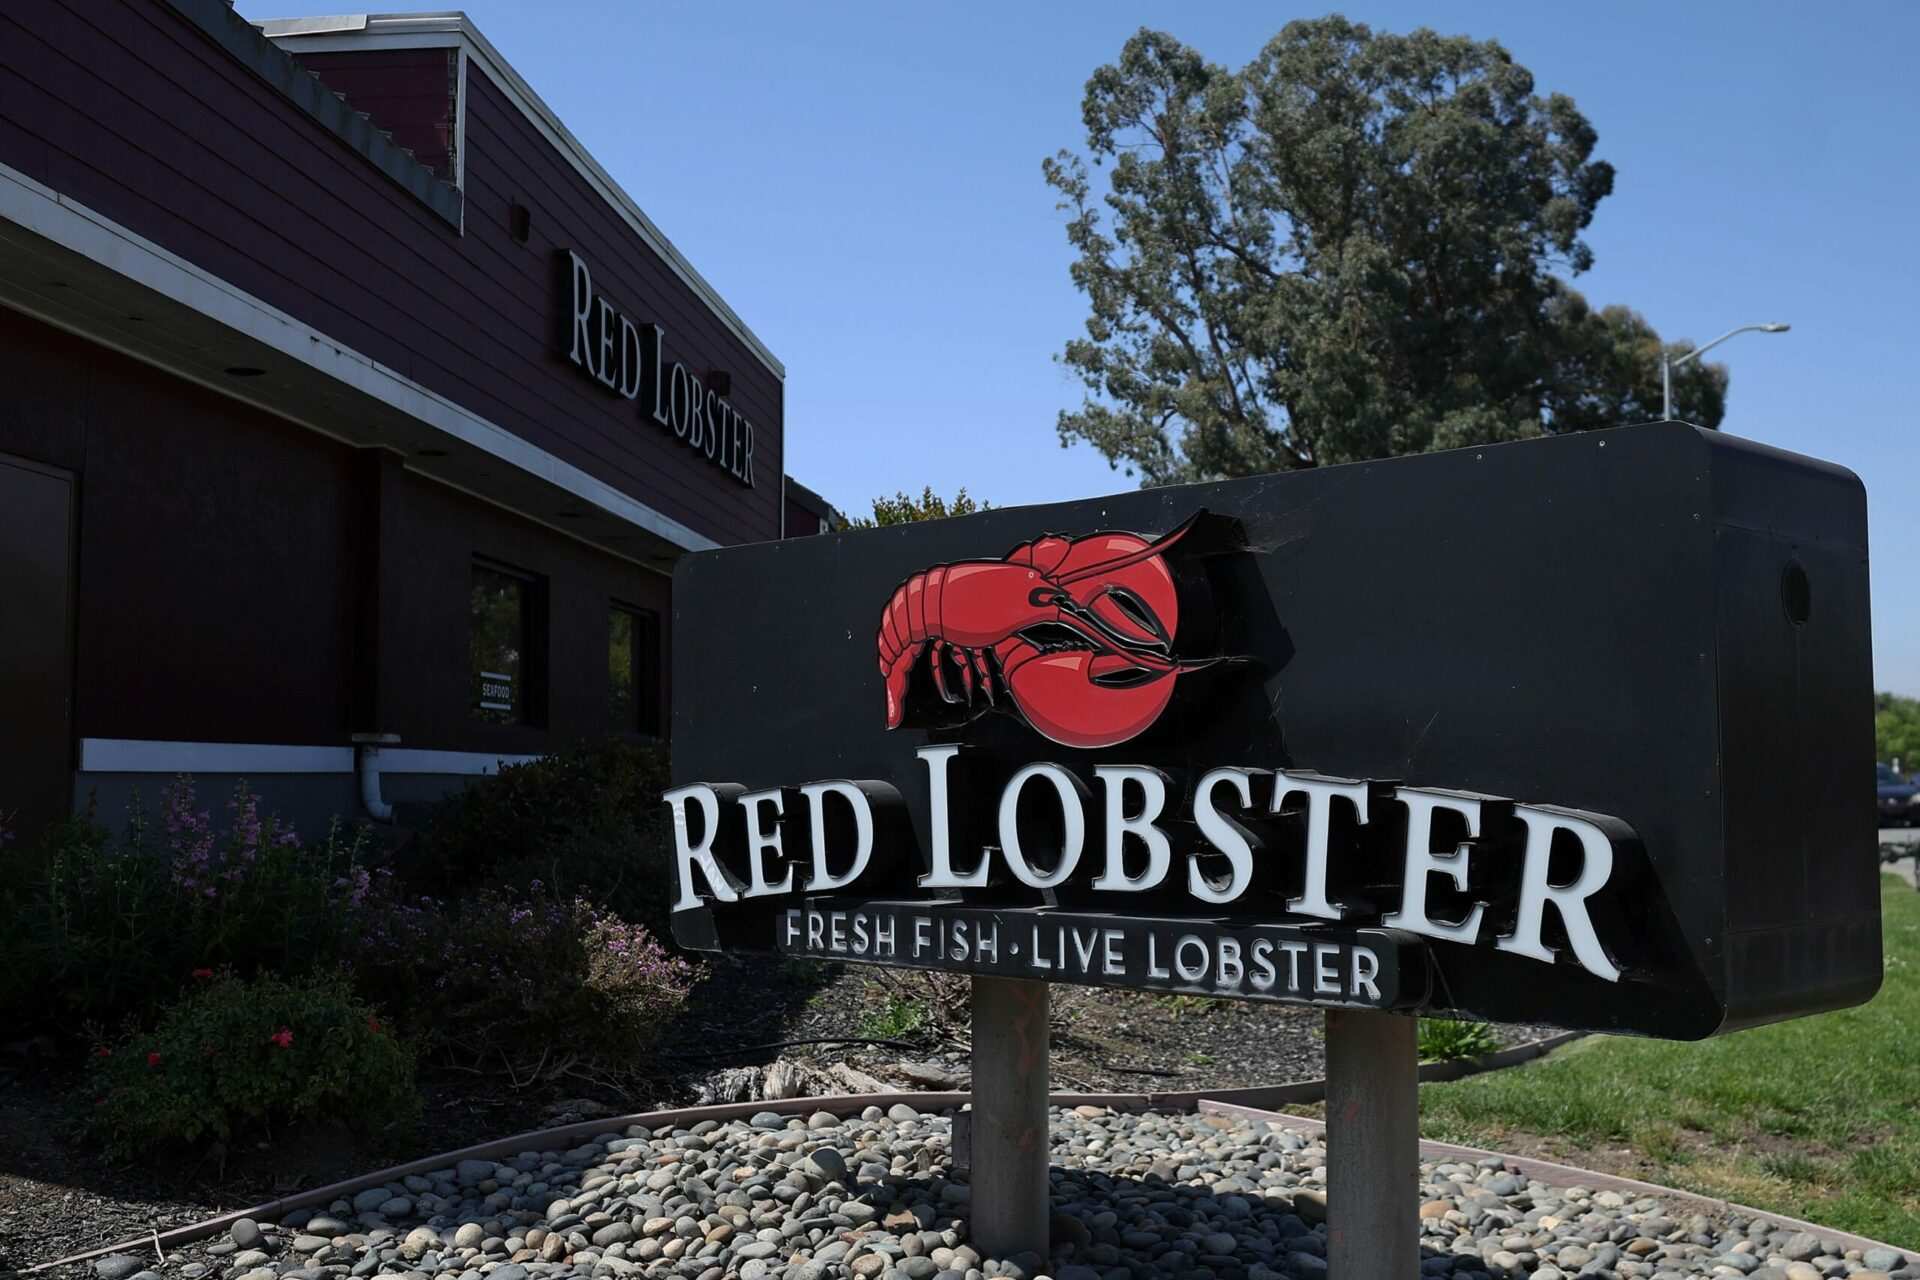 Red Lobster offered customers all-you-can-eat shrimp. That was a mistake